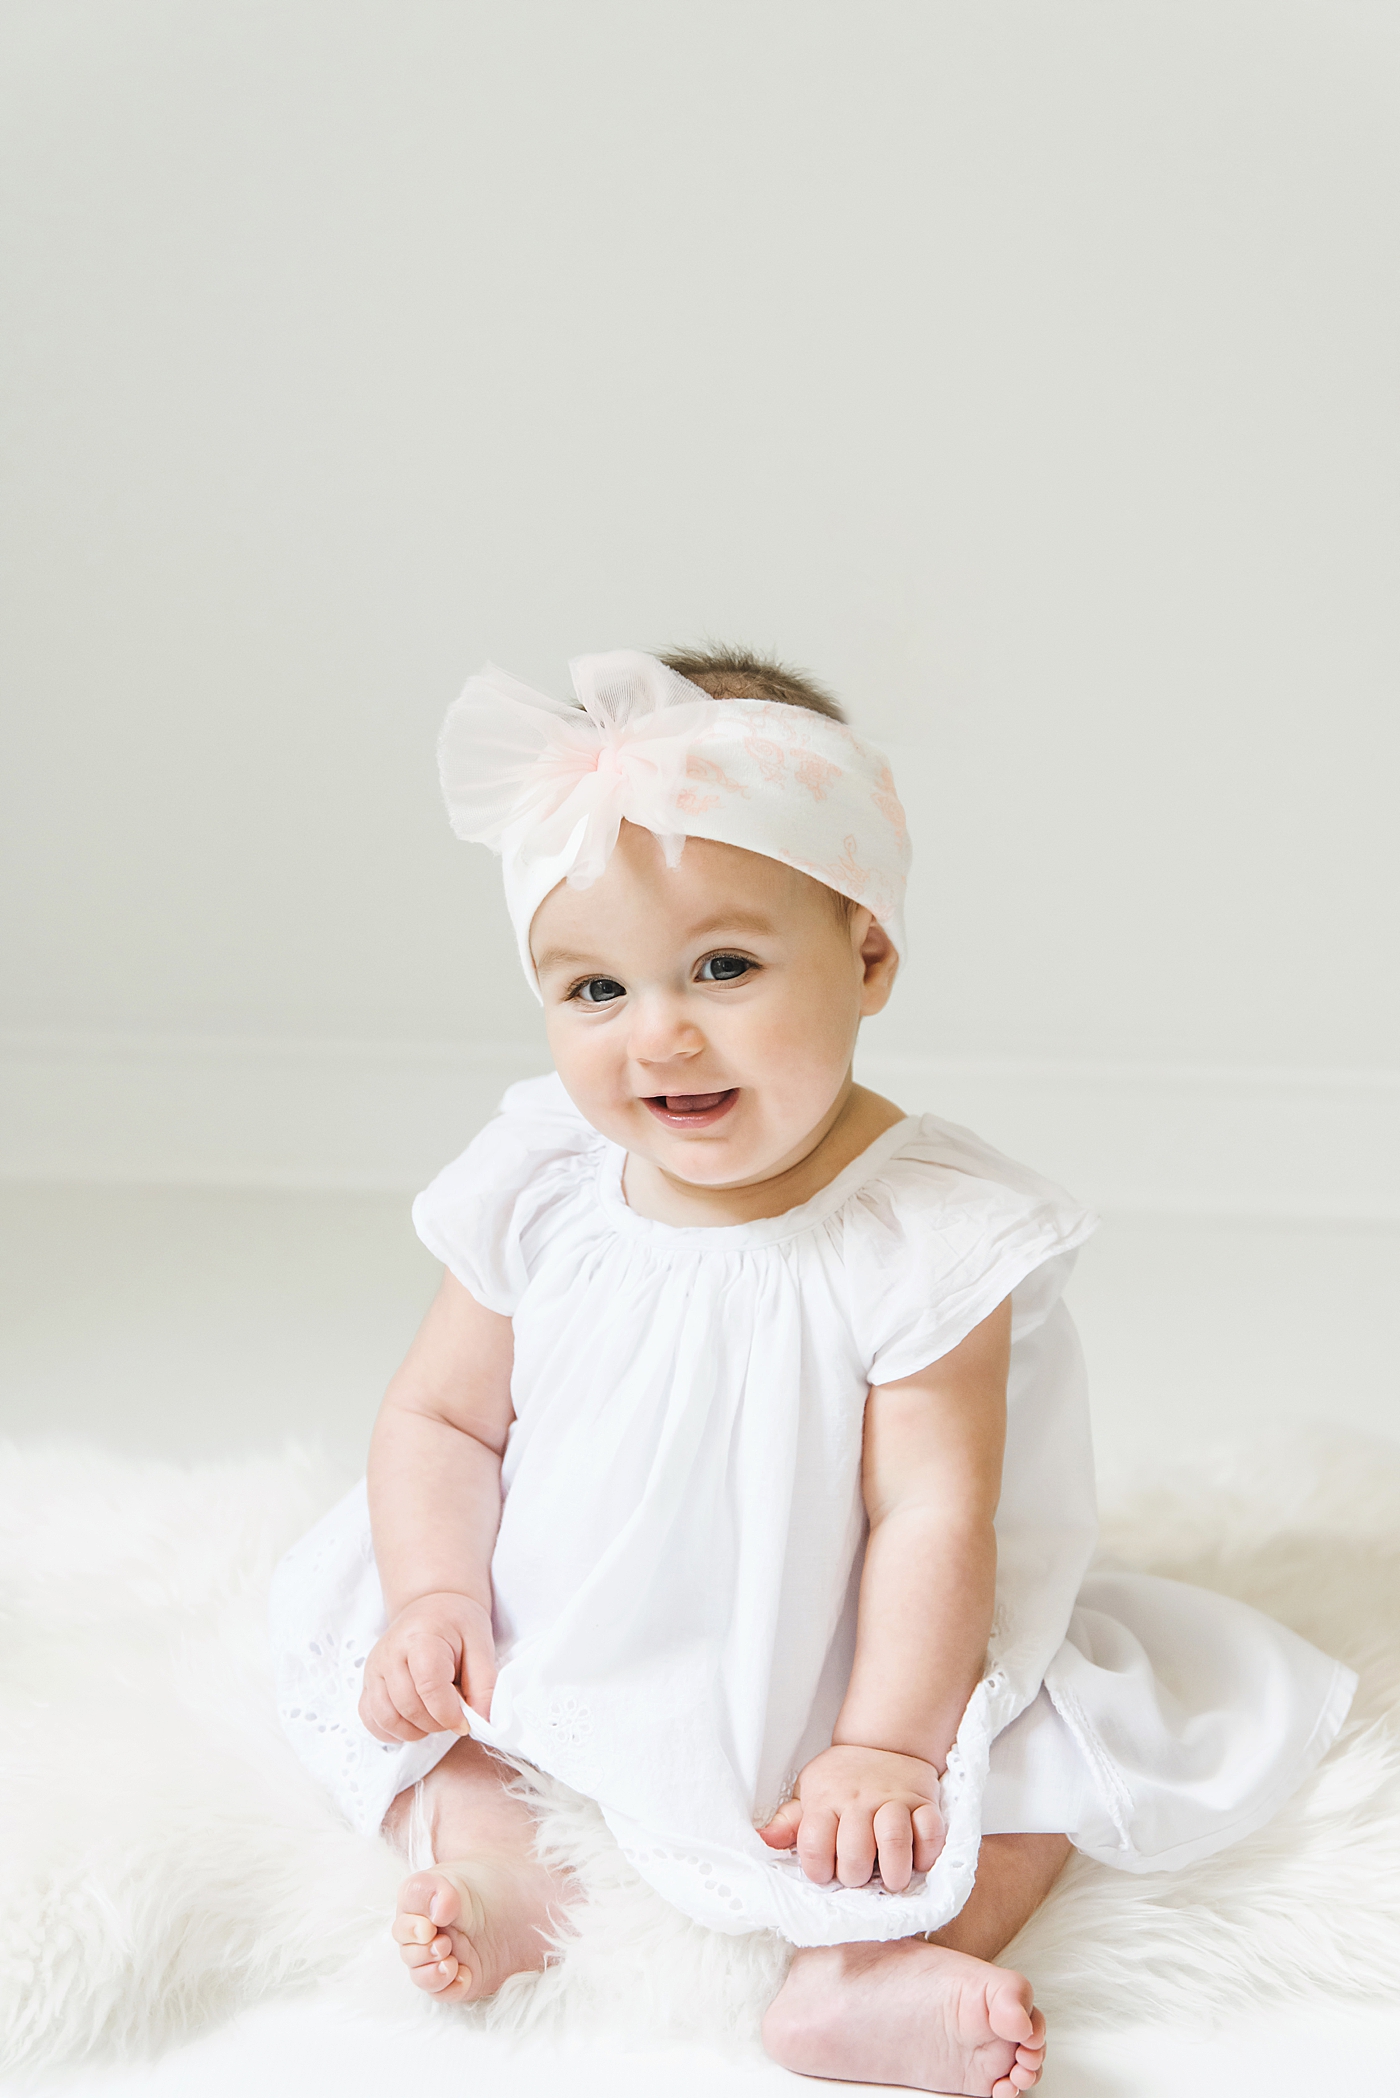 Baby girl with pink and white headband sitting up in the studio | Baby photographer in Charlotte Anna Wisjo